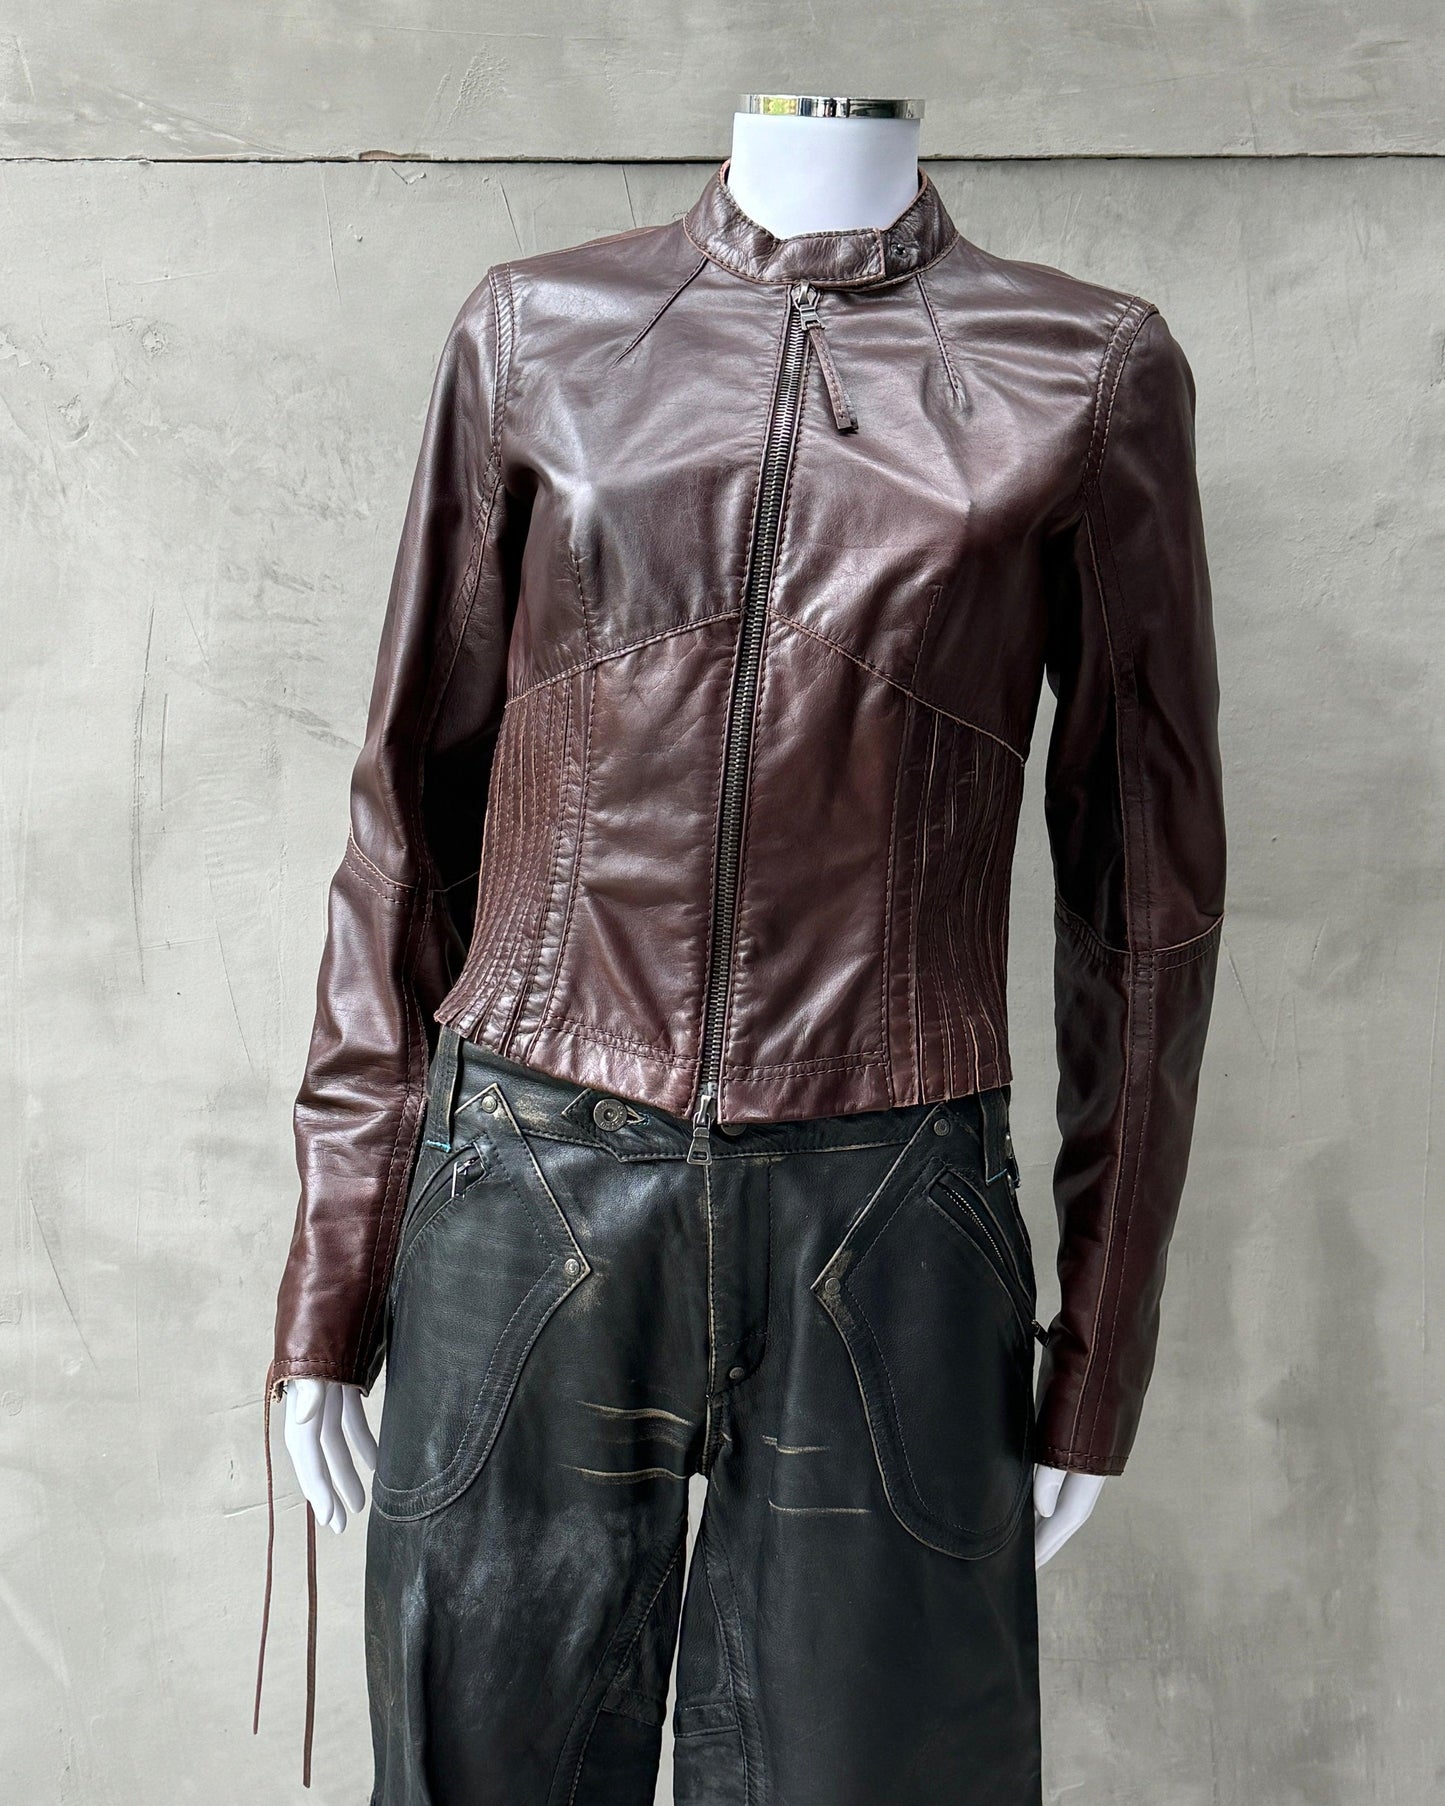 PRADA SPORT 2000'S LEATHER LACE UP CORSET JACKET - M - Known Source